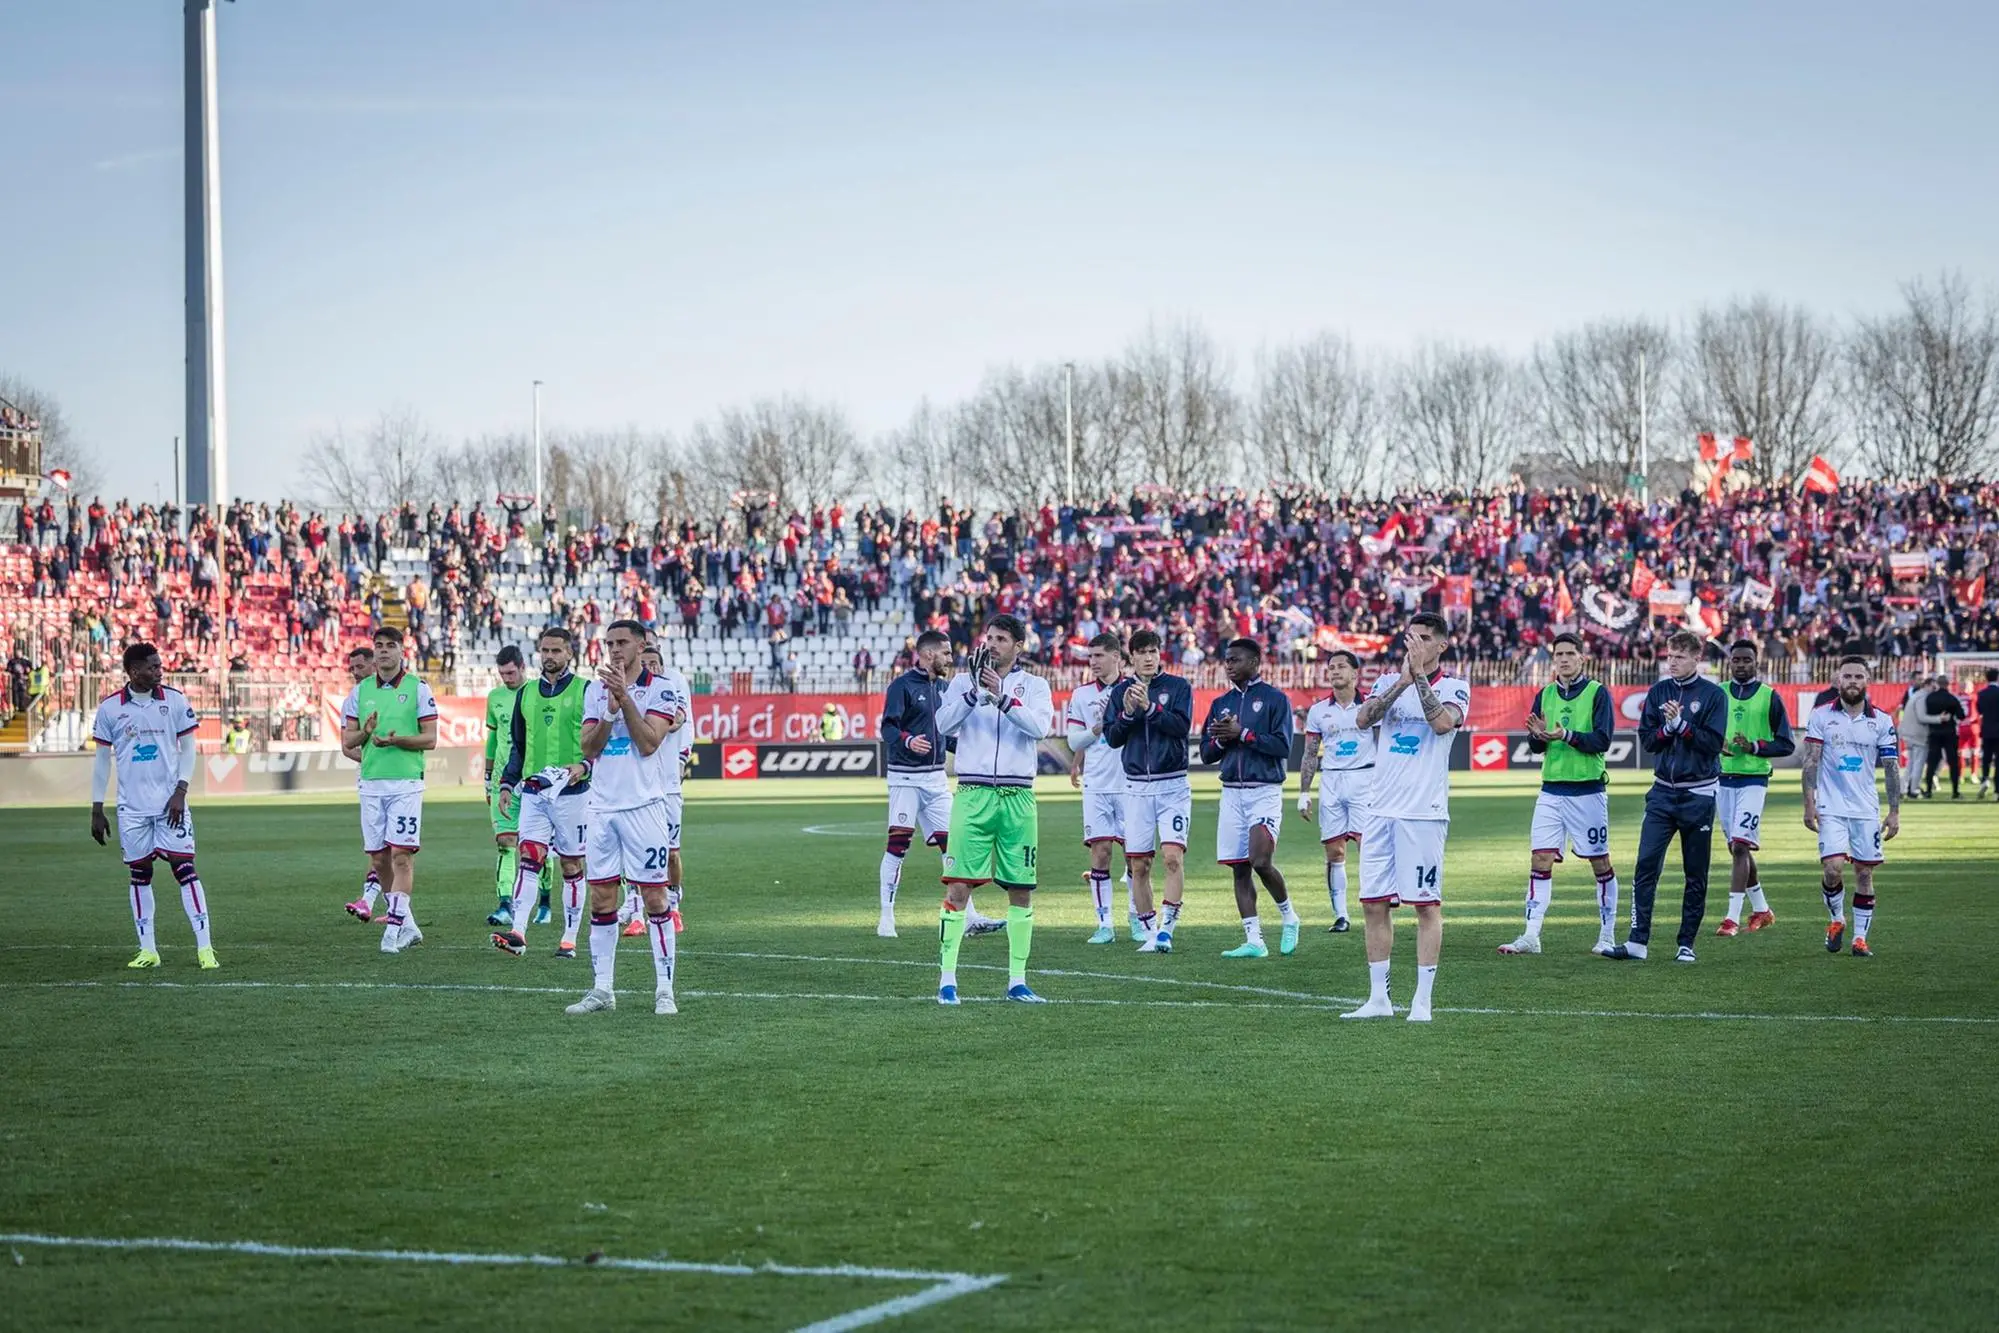 Greetings to the fans after the defeat in Monza (Twitter-Cagliari Calcio)